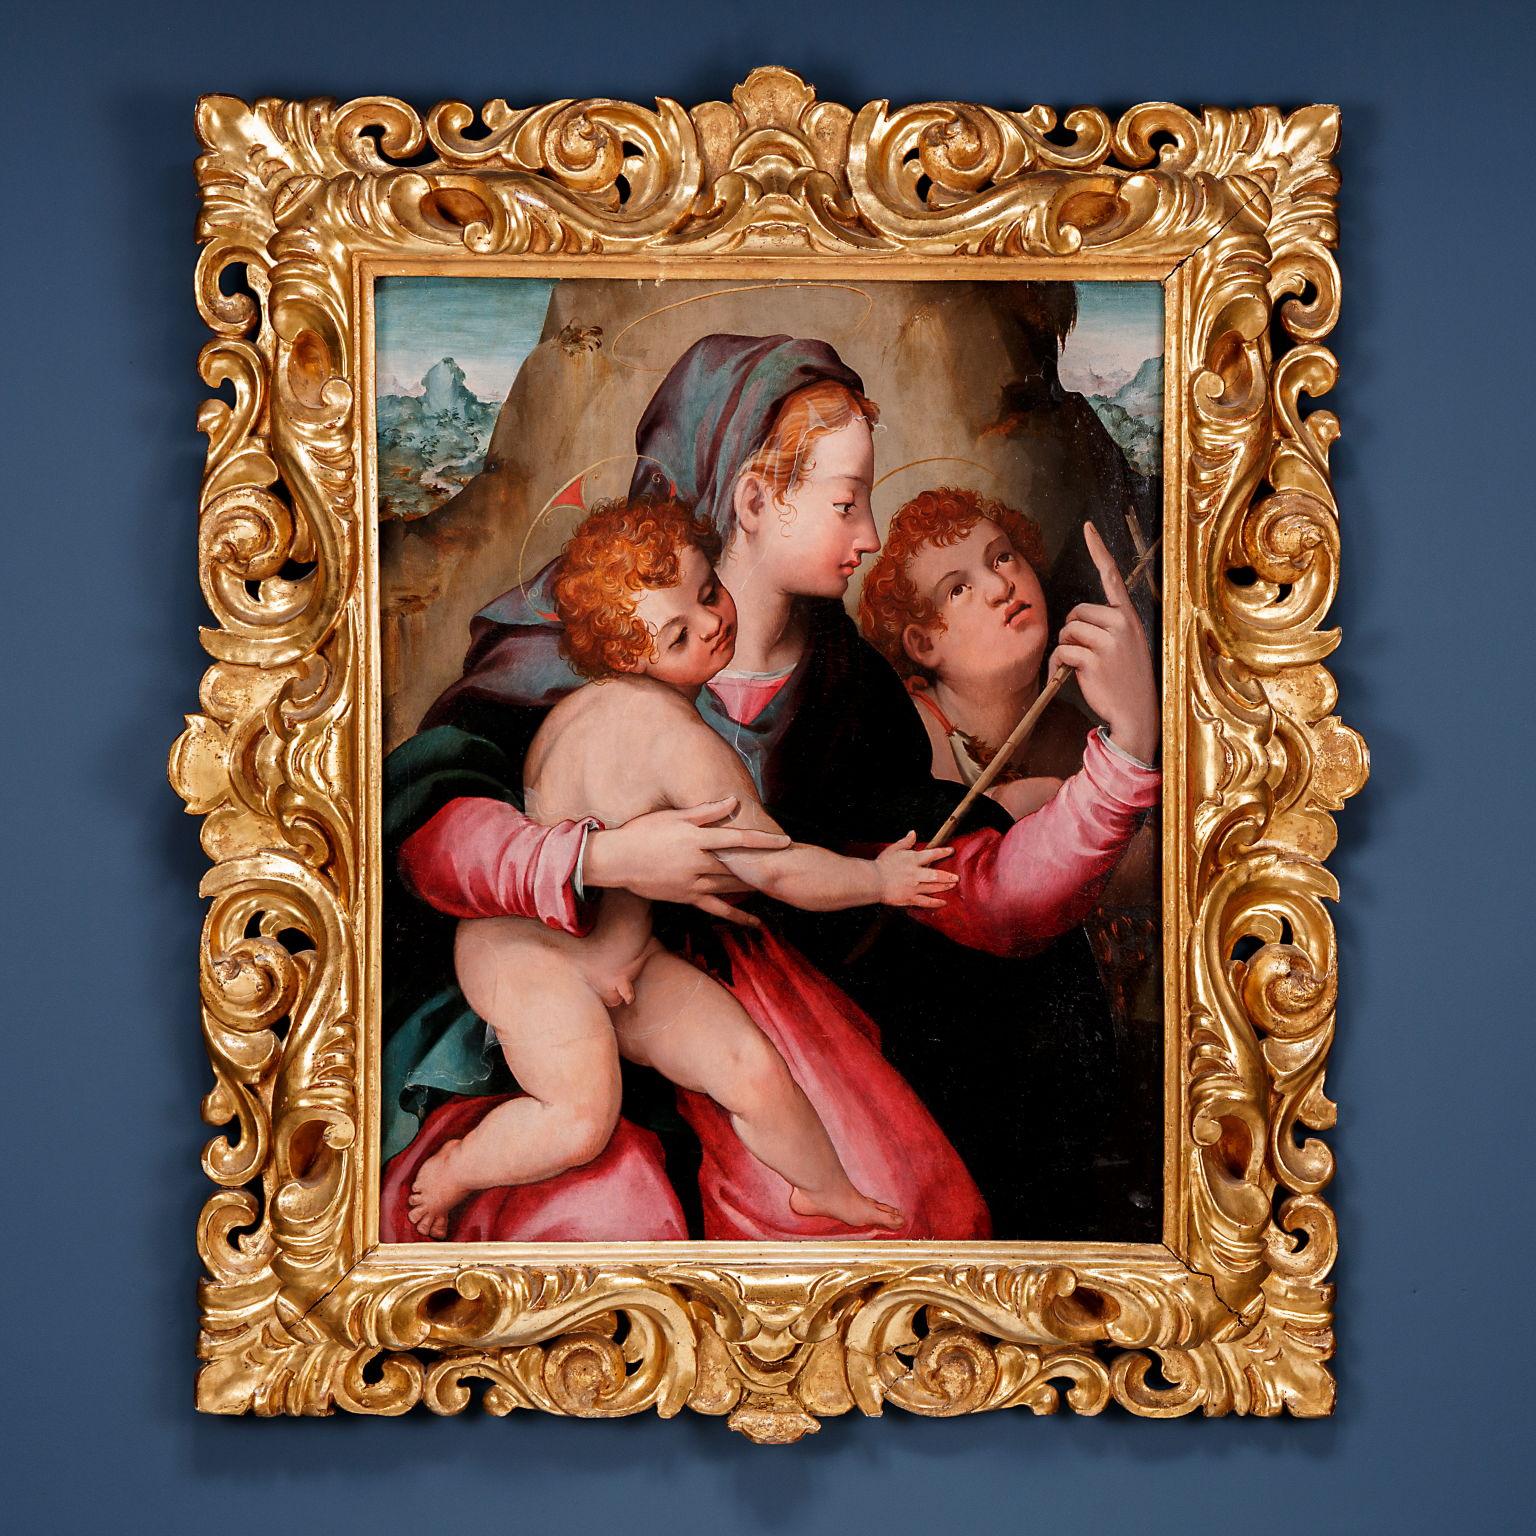 Unknown Figurative Painting - Madonna and Child with St. John, c. 1540-1560. Attributed to Carlo Portelli